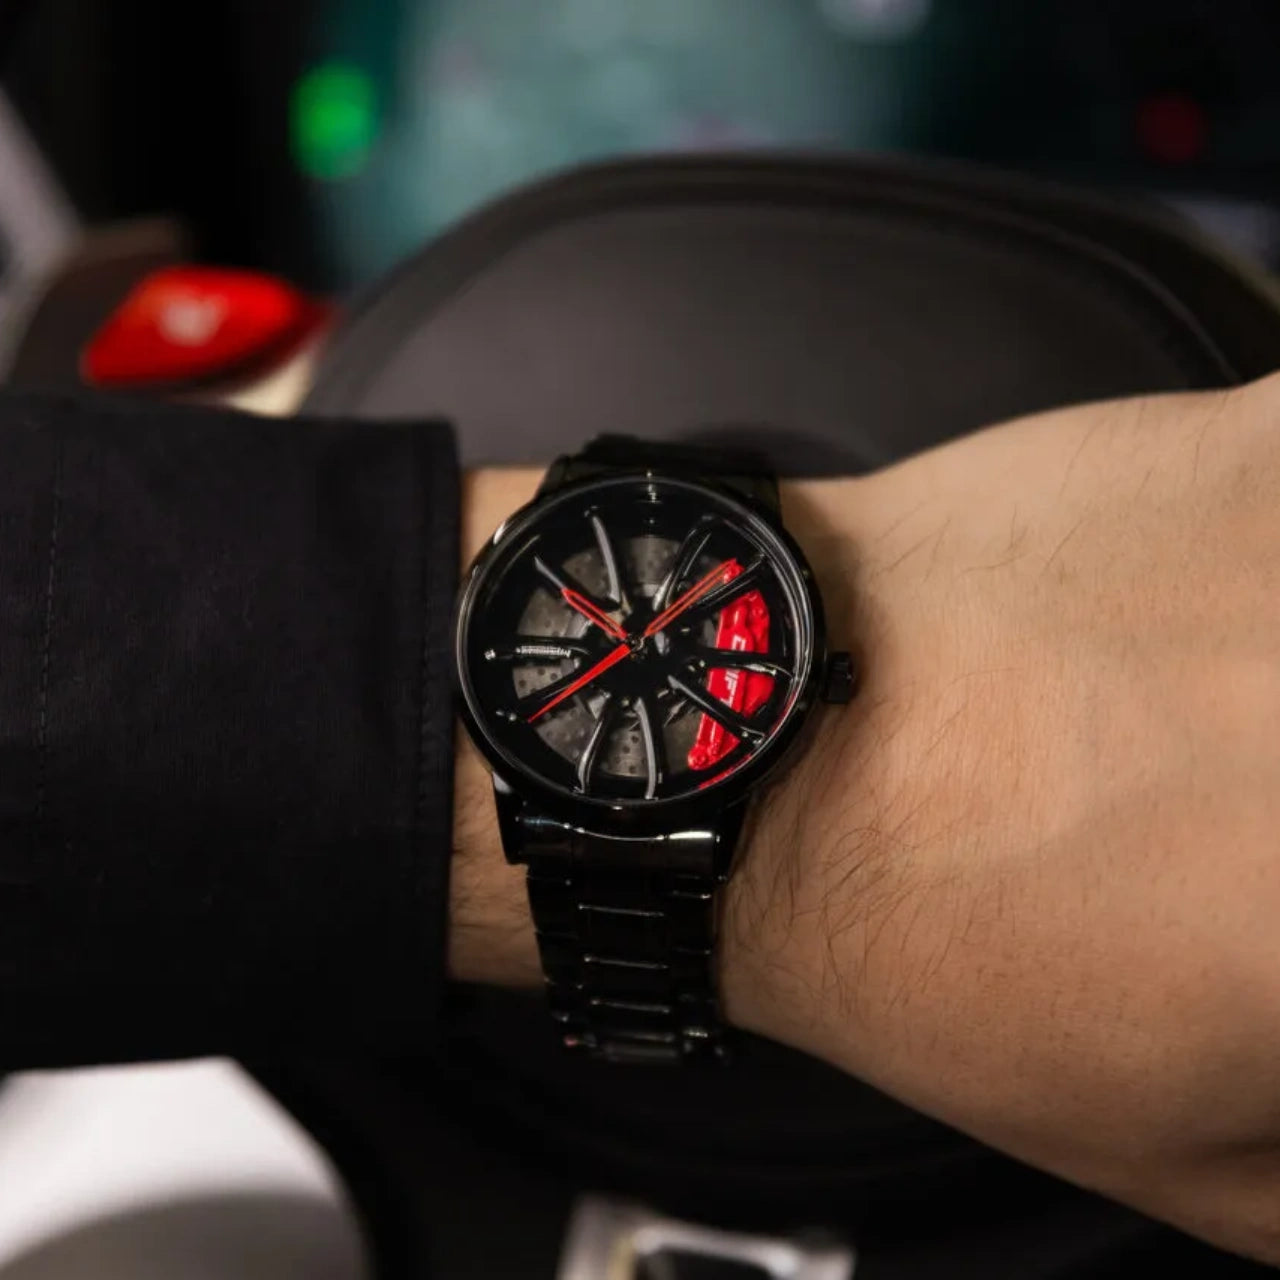 Illuminate your automotive passion with our striking red Performance GT Rim Watch! Meticulously crafted by a German startup, these precision watches are designed to captivate motorsport, tuning, and auto aficionados. Get ready to ignite your passion in style! #id_46744365400394